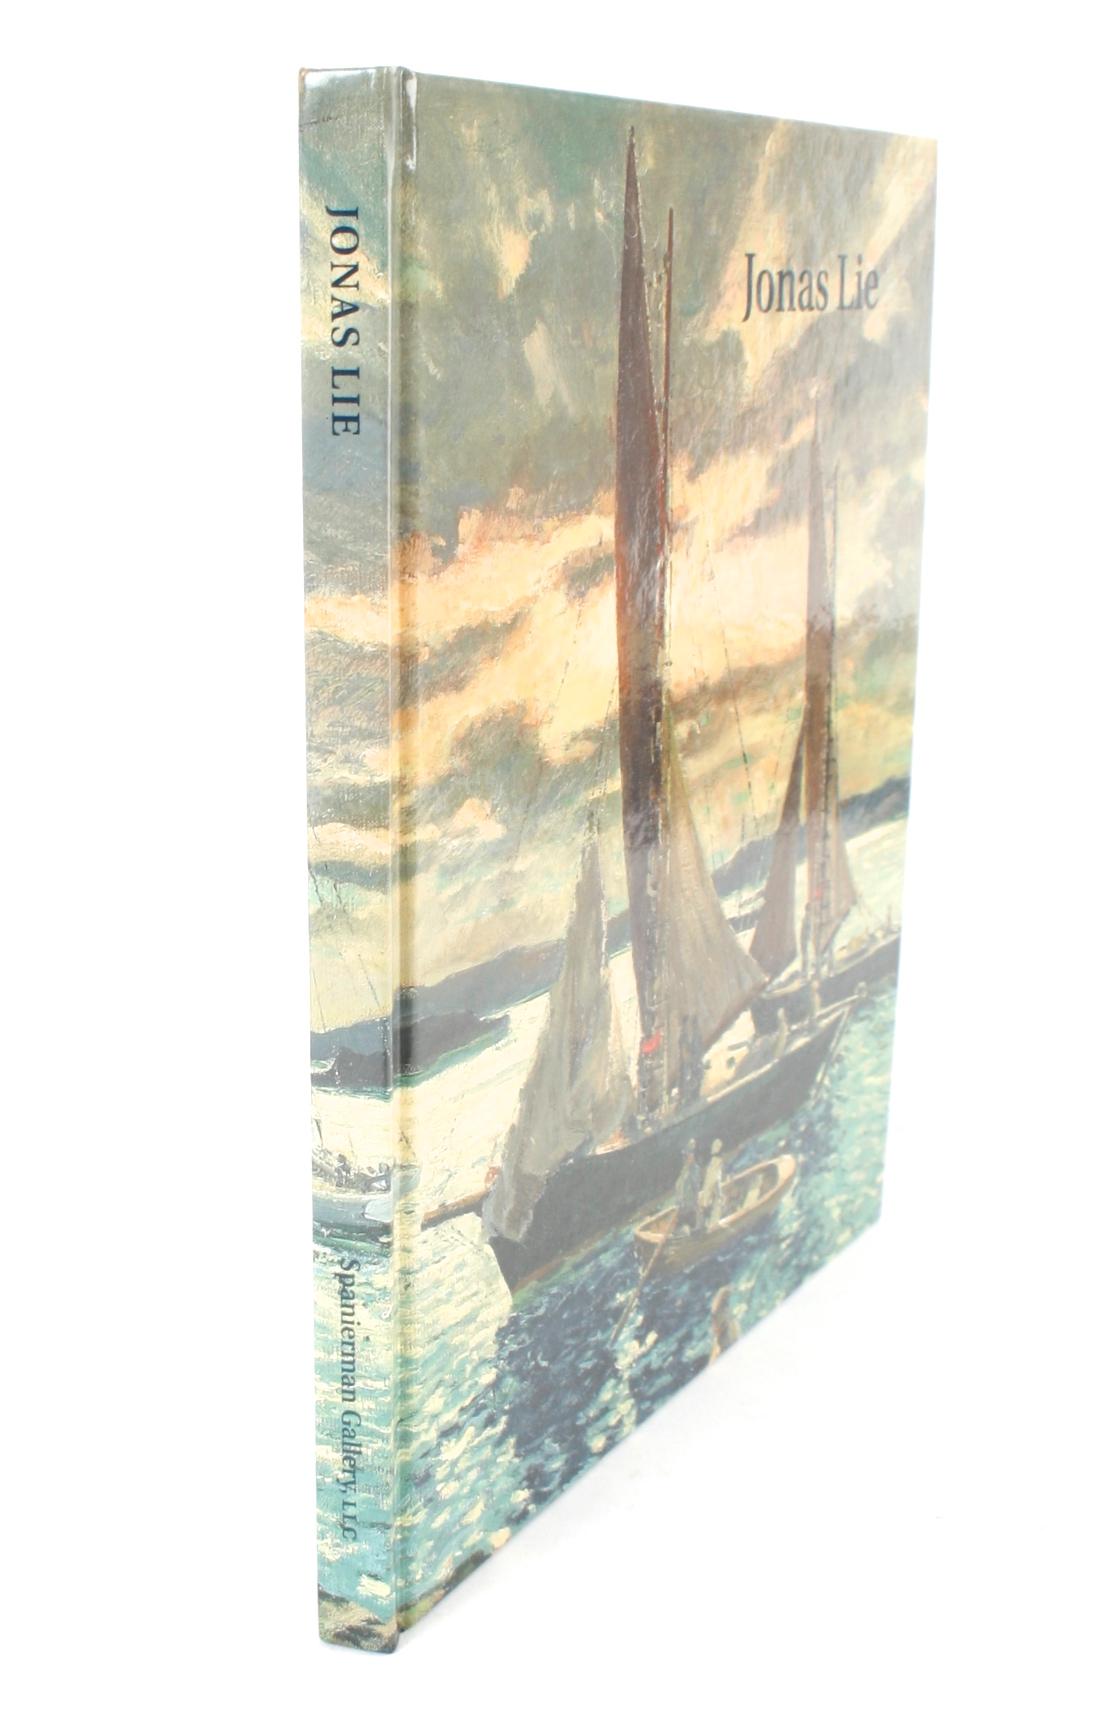 Jonas Lie (1880-1940), by William H. and Carol Lowrey Gerdts. Spanierman gallery, 2005. First Edition hardcover. 120 page exhibition catalog, in color with some fold-out examples of his paintings. The exhibition was January 12, February 25, 2006.